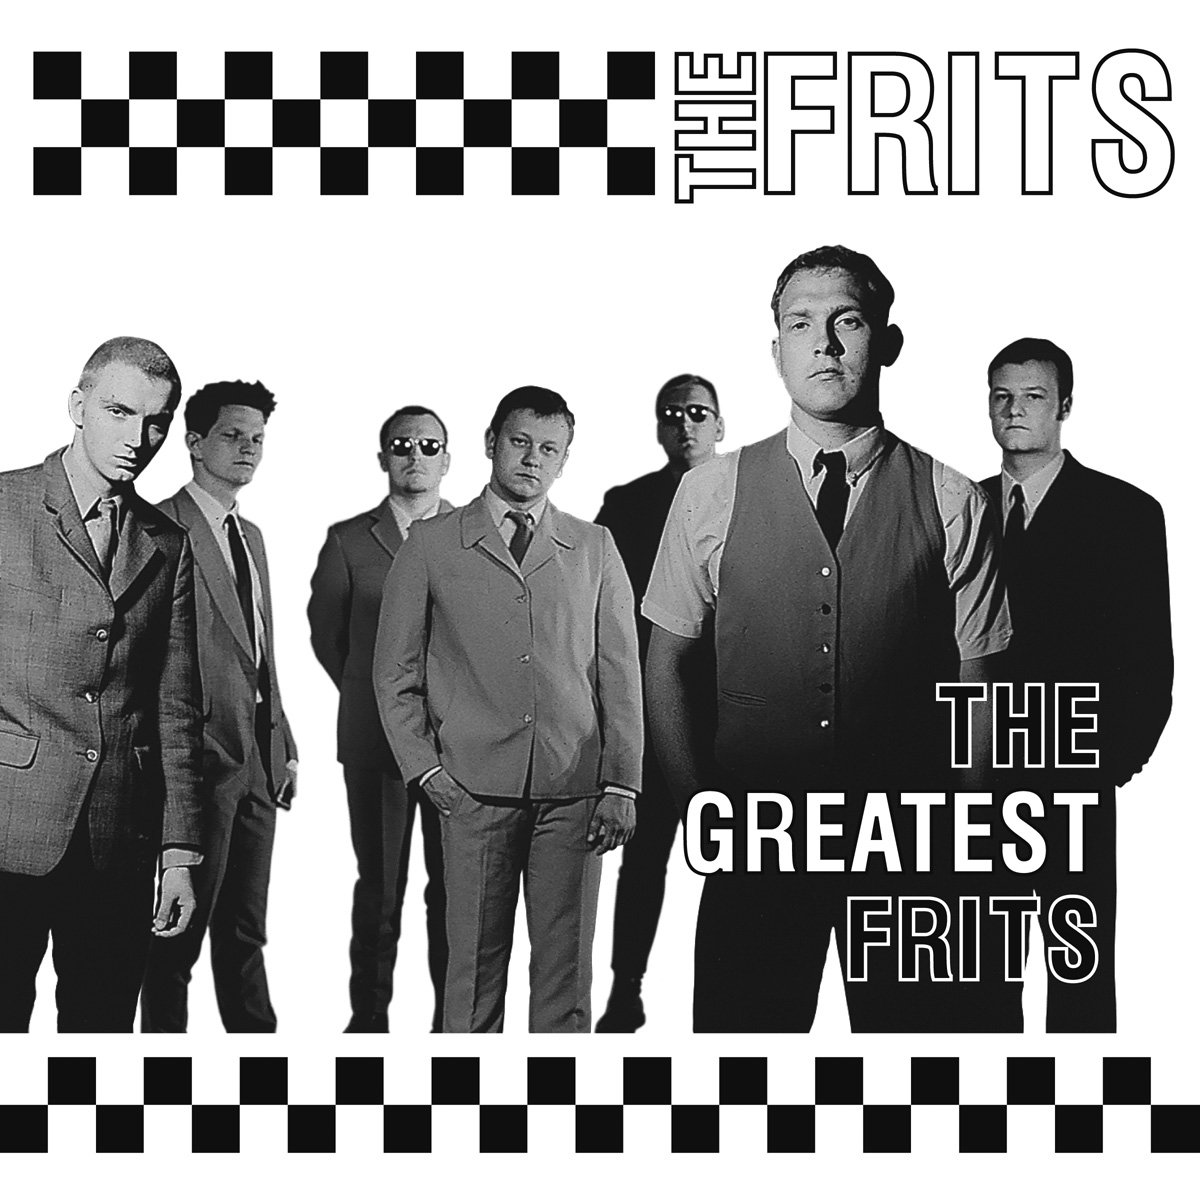 THE FRITS - new album THE GREATEST FRITS Release am 22. Januar 2016THE FRITS - neues Album THE GREATEST FRITS release THE FRITS - neues Album THE GREA